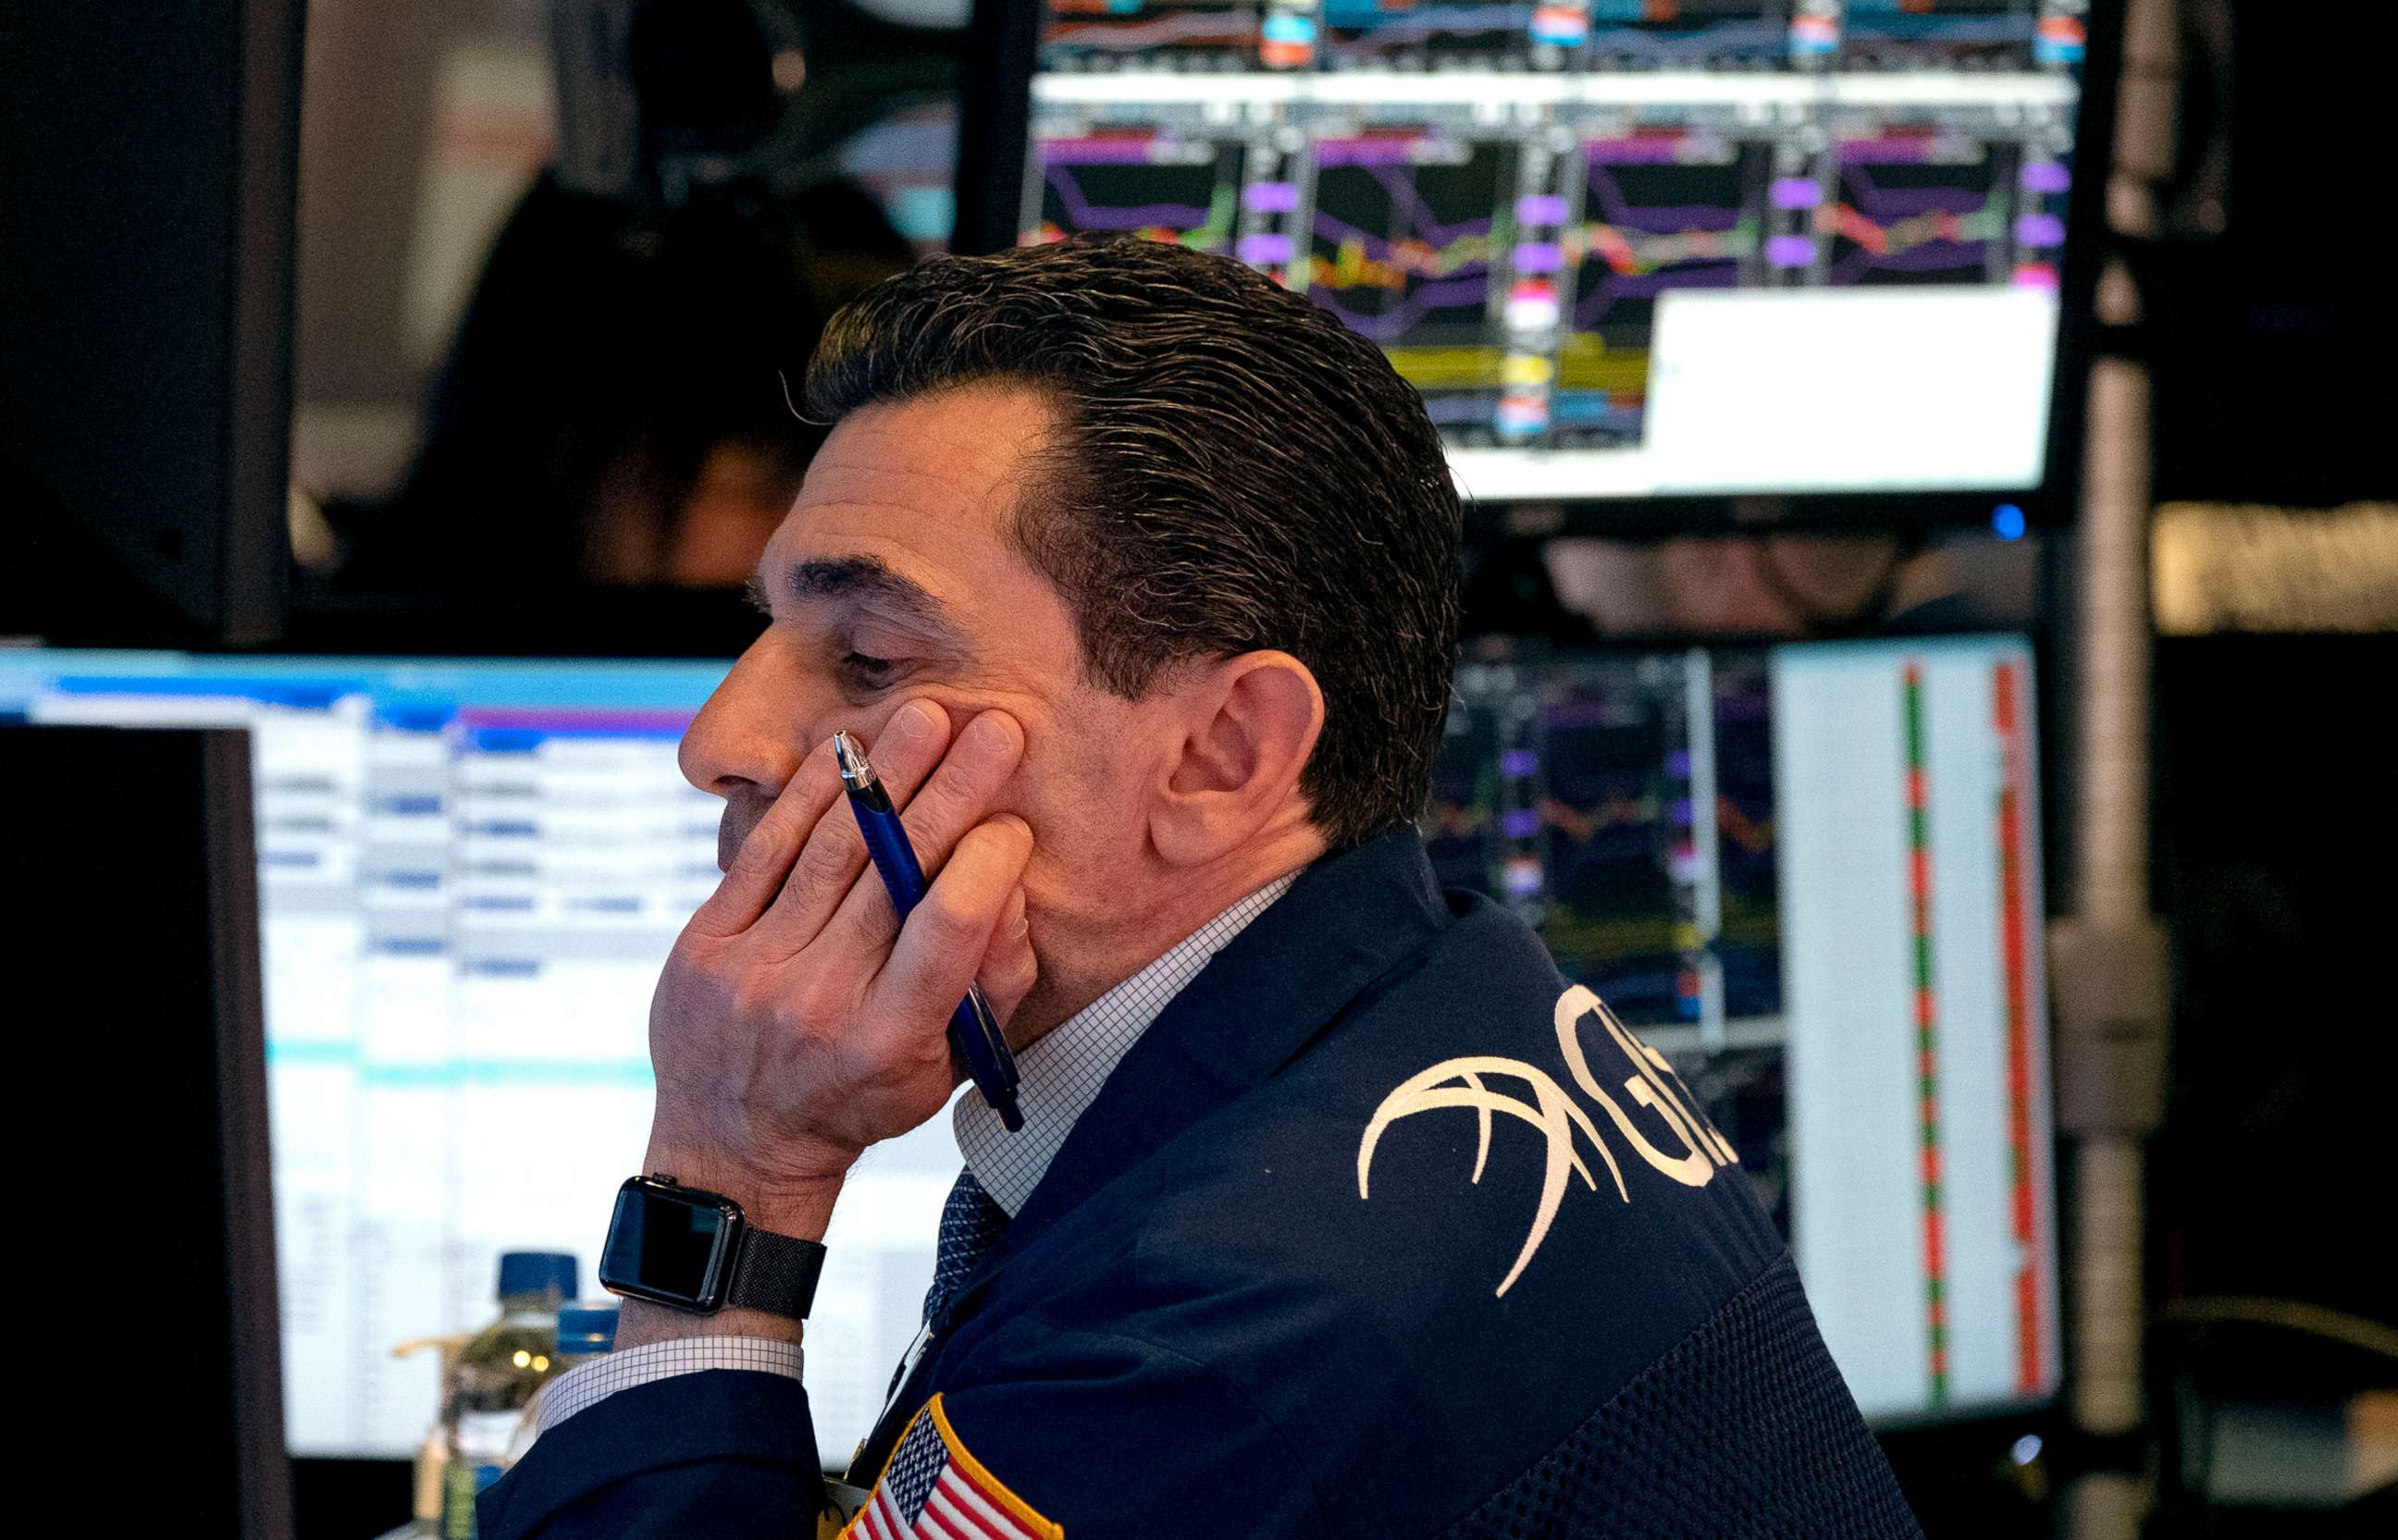 PHOTO: Trader Peter Mazza works on the floor of the New York Stock Exchange, March 16, 2020.